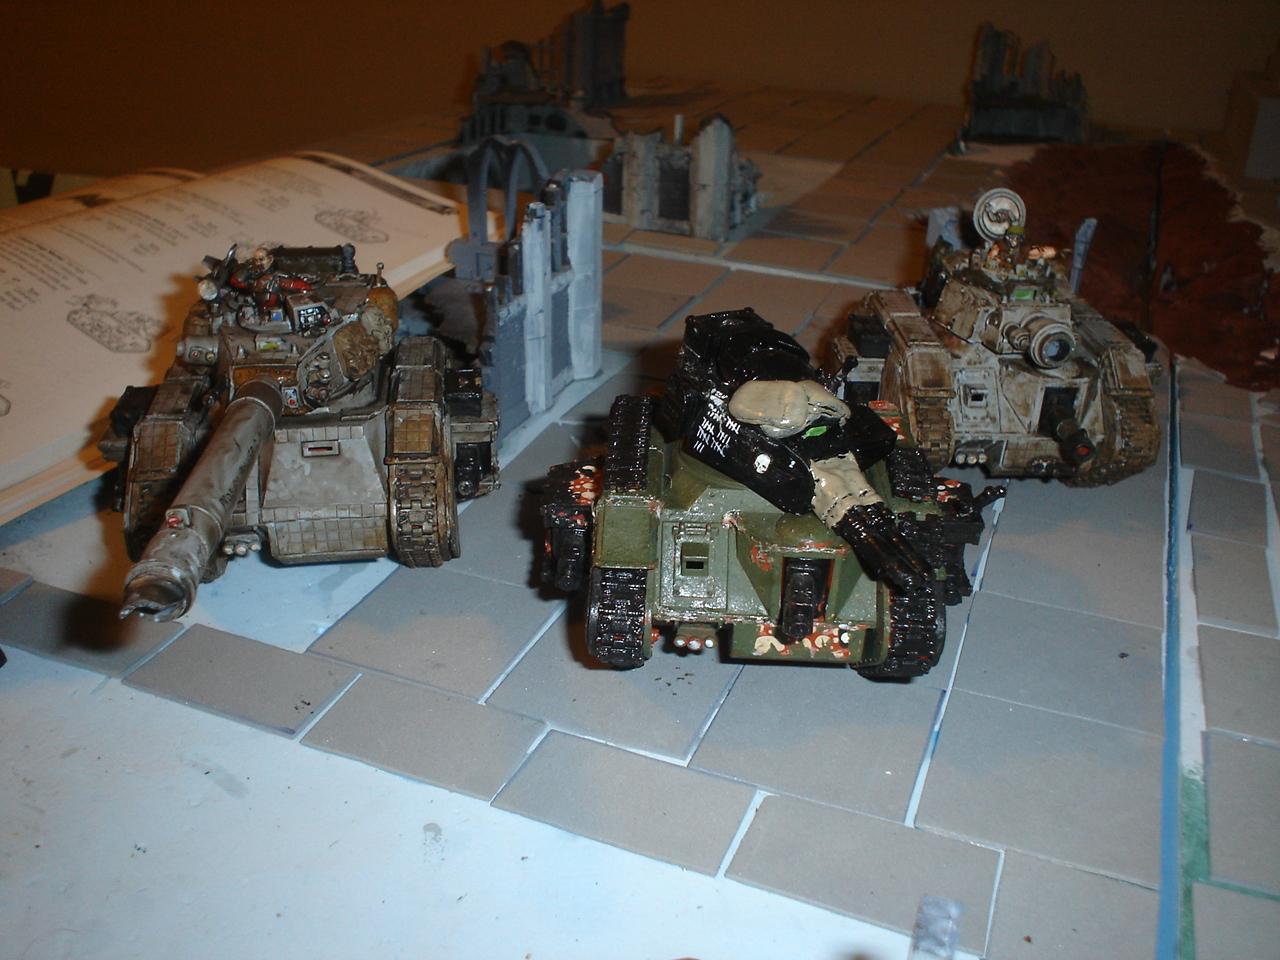 Old russ next to two "Ressurected" Tanks, Vanquisher and Demolisher